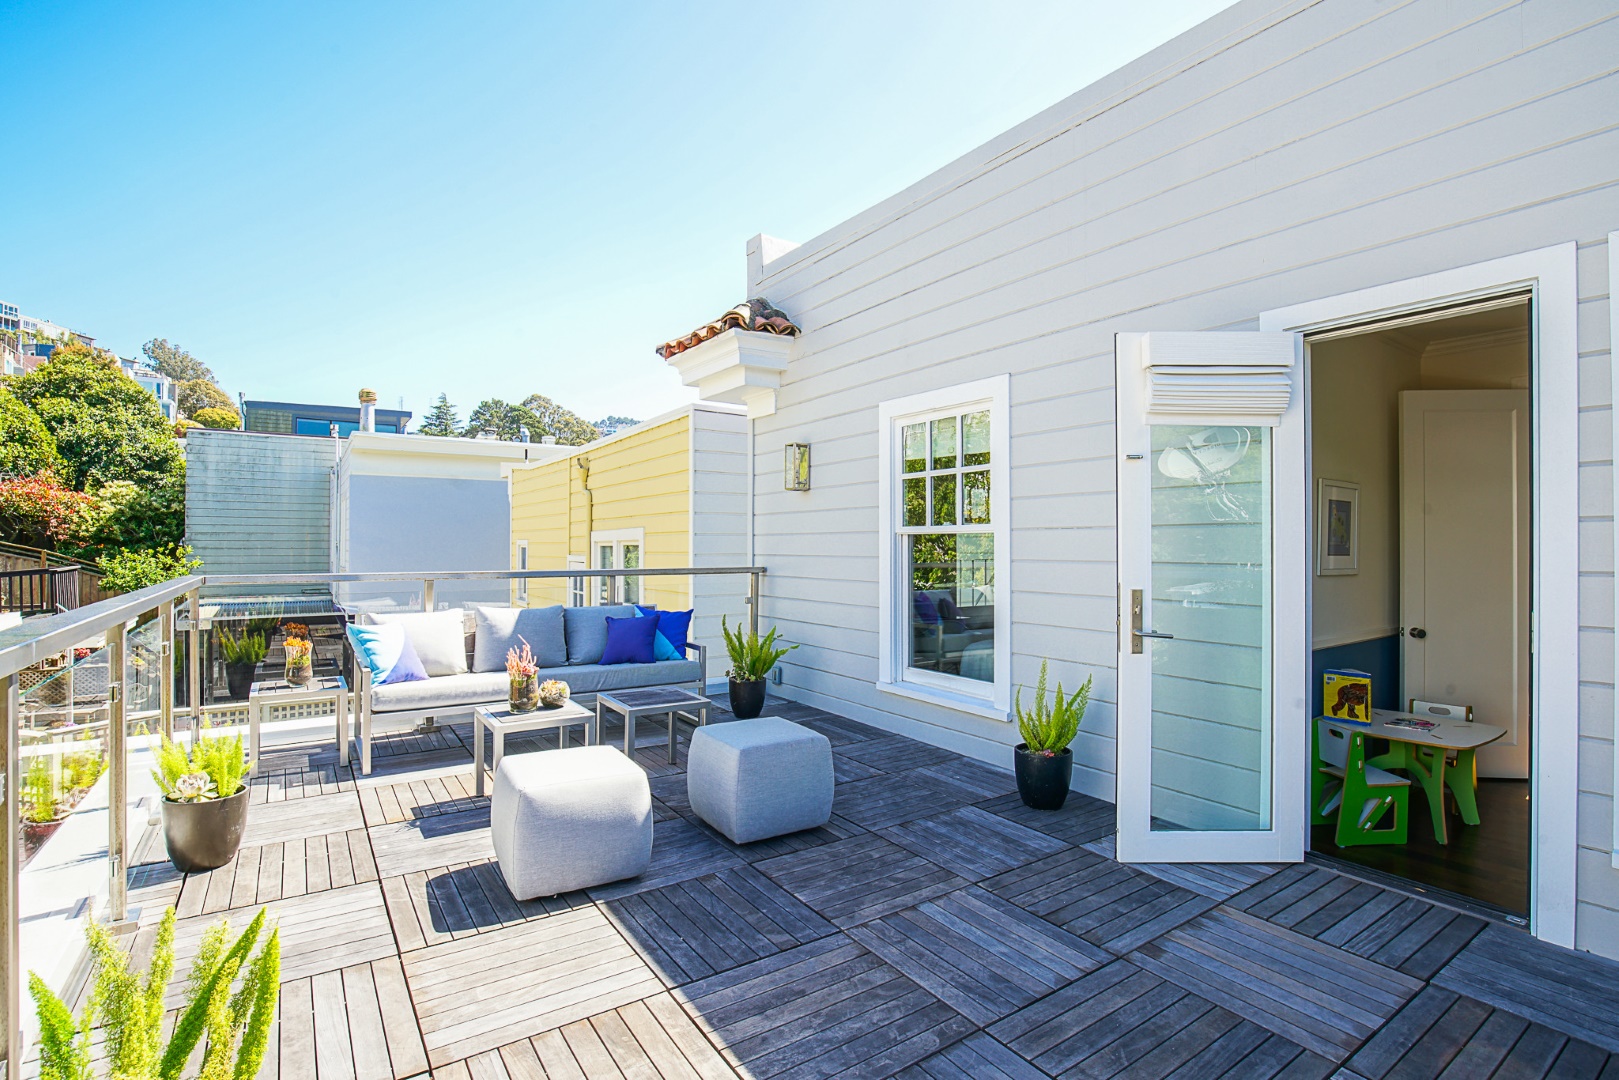 20 Transitional Deck Designs for Your Perfect Outdoor Entertainment Space